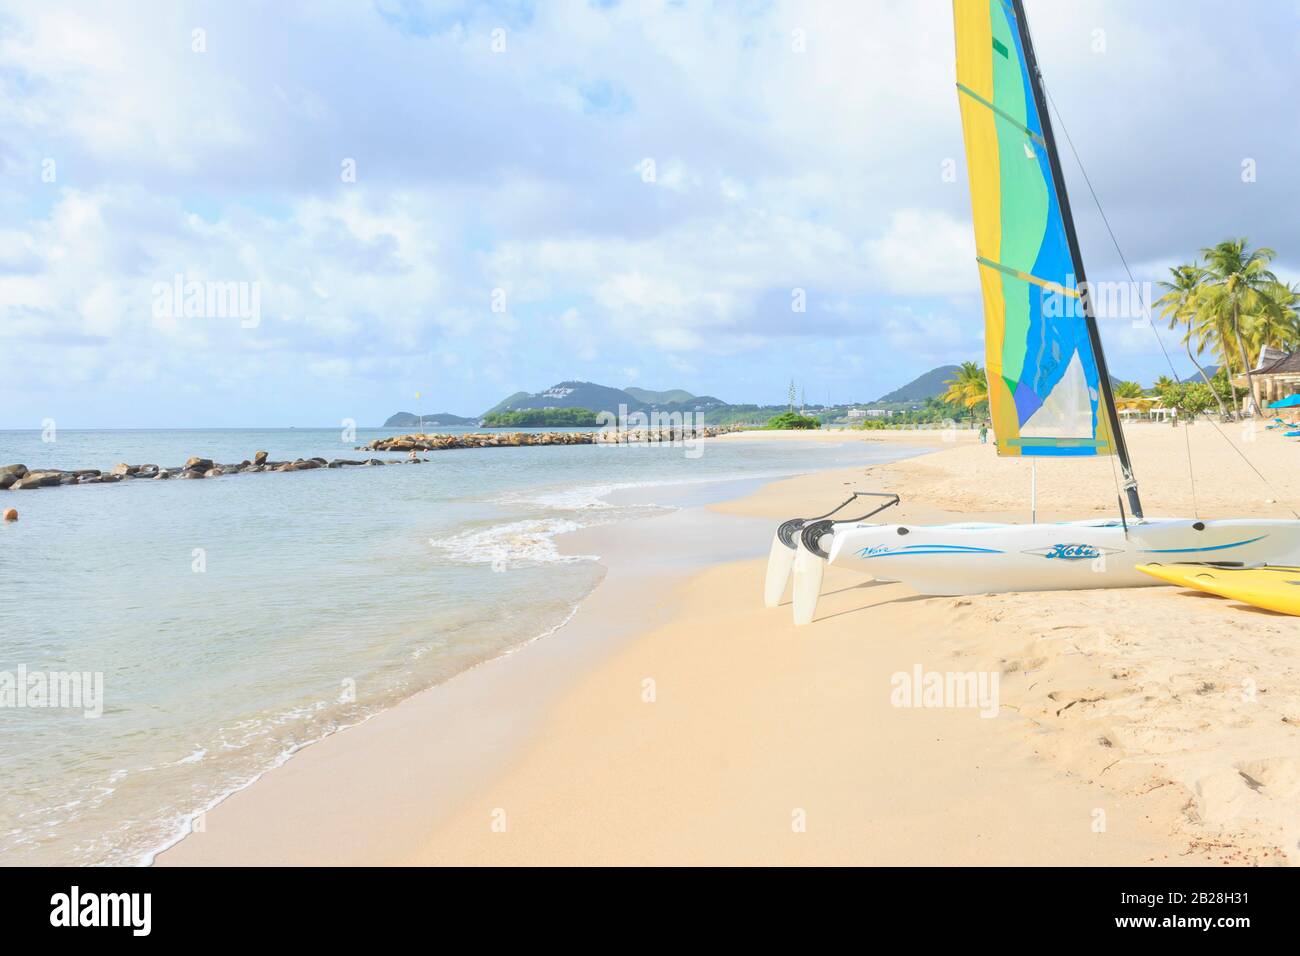 Castries, Saint Lucia - July 12, 2016. Hobie Sailing Catamaran on Vigie beach ready for some action on a bright sunny cloudy day near the water's edge Stock Photo